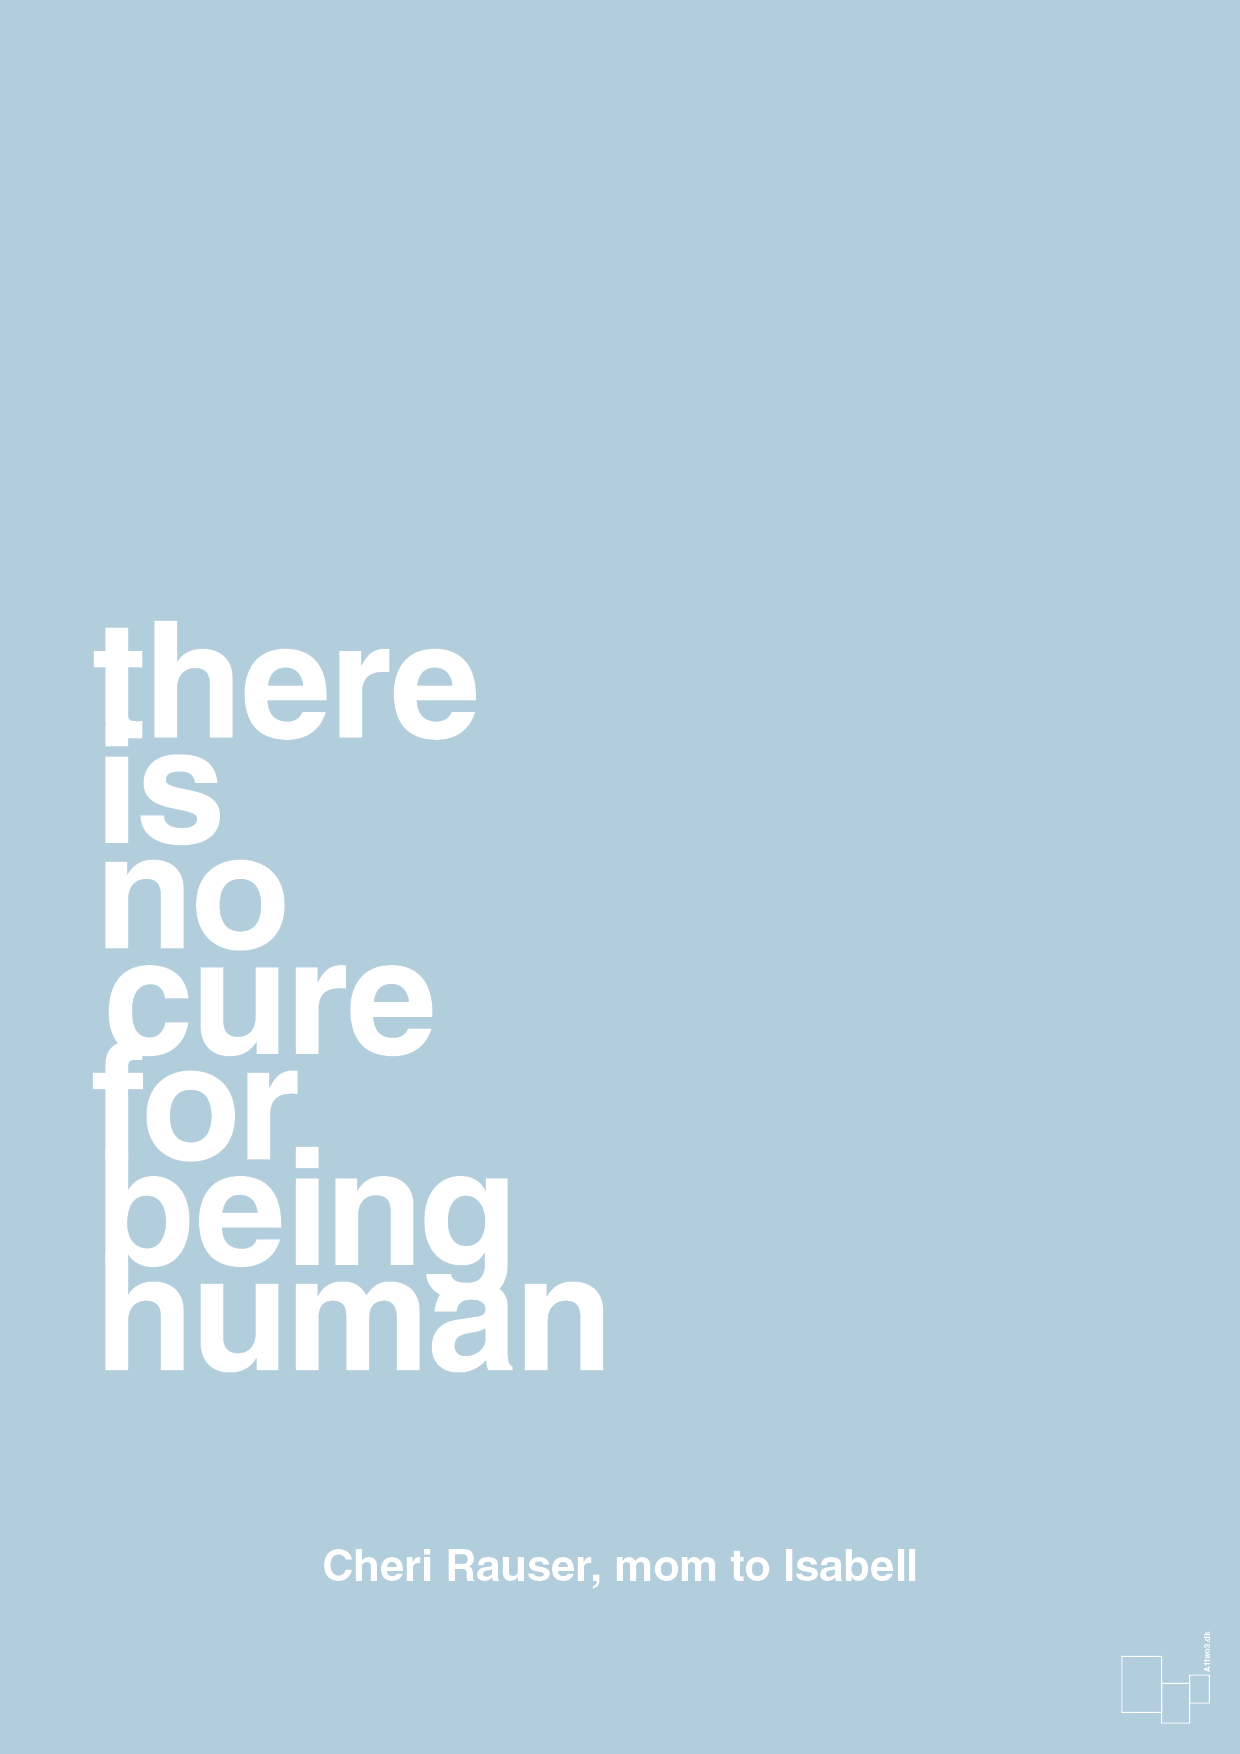 there is no cure for being human - Plakat med Samfund i Heavenly Blue